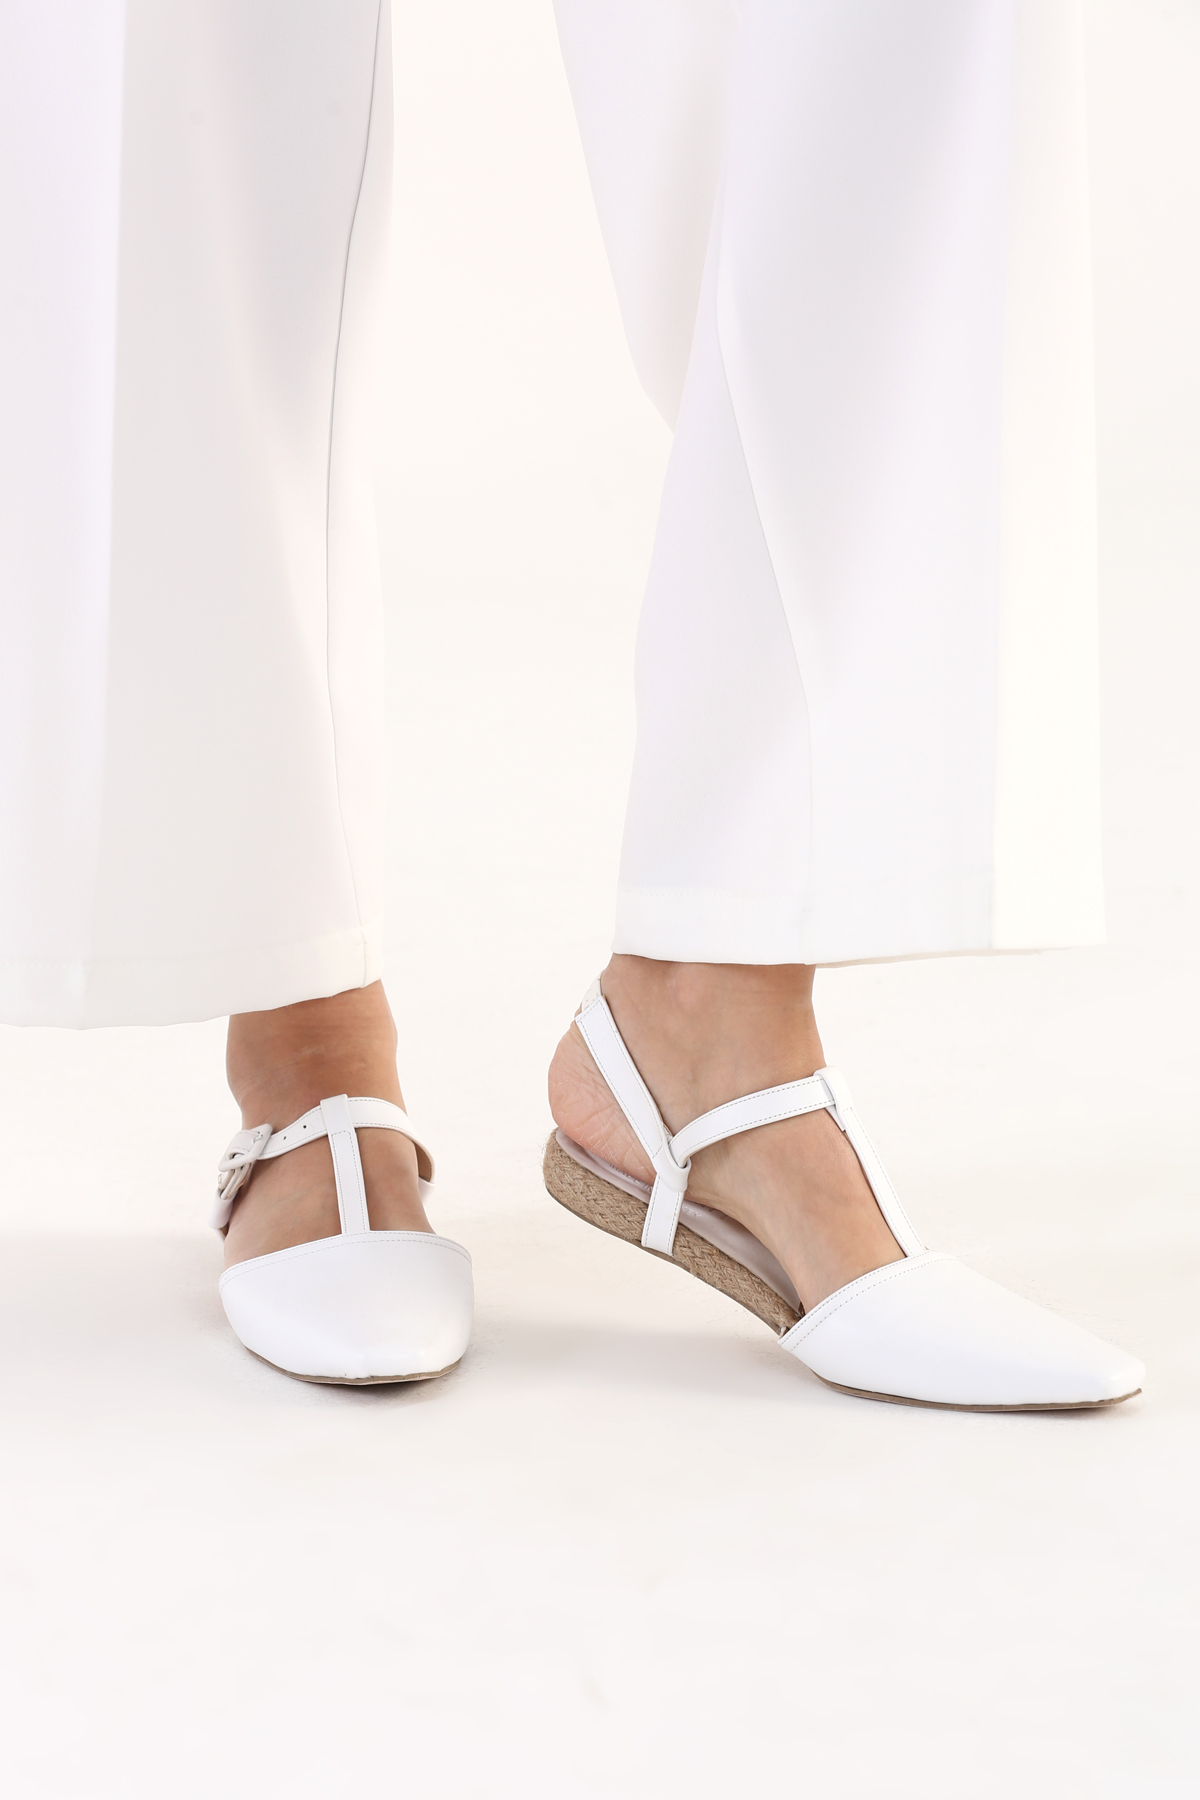 Square Toe Ankle Strap Flat Shoes